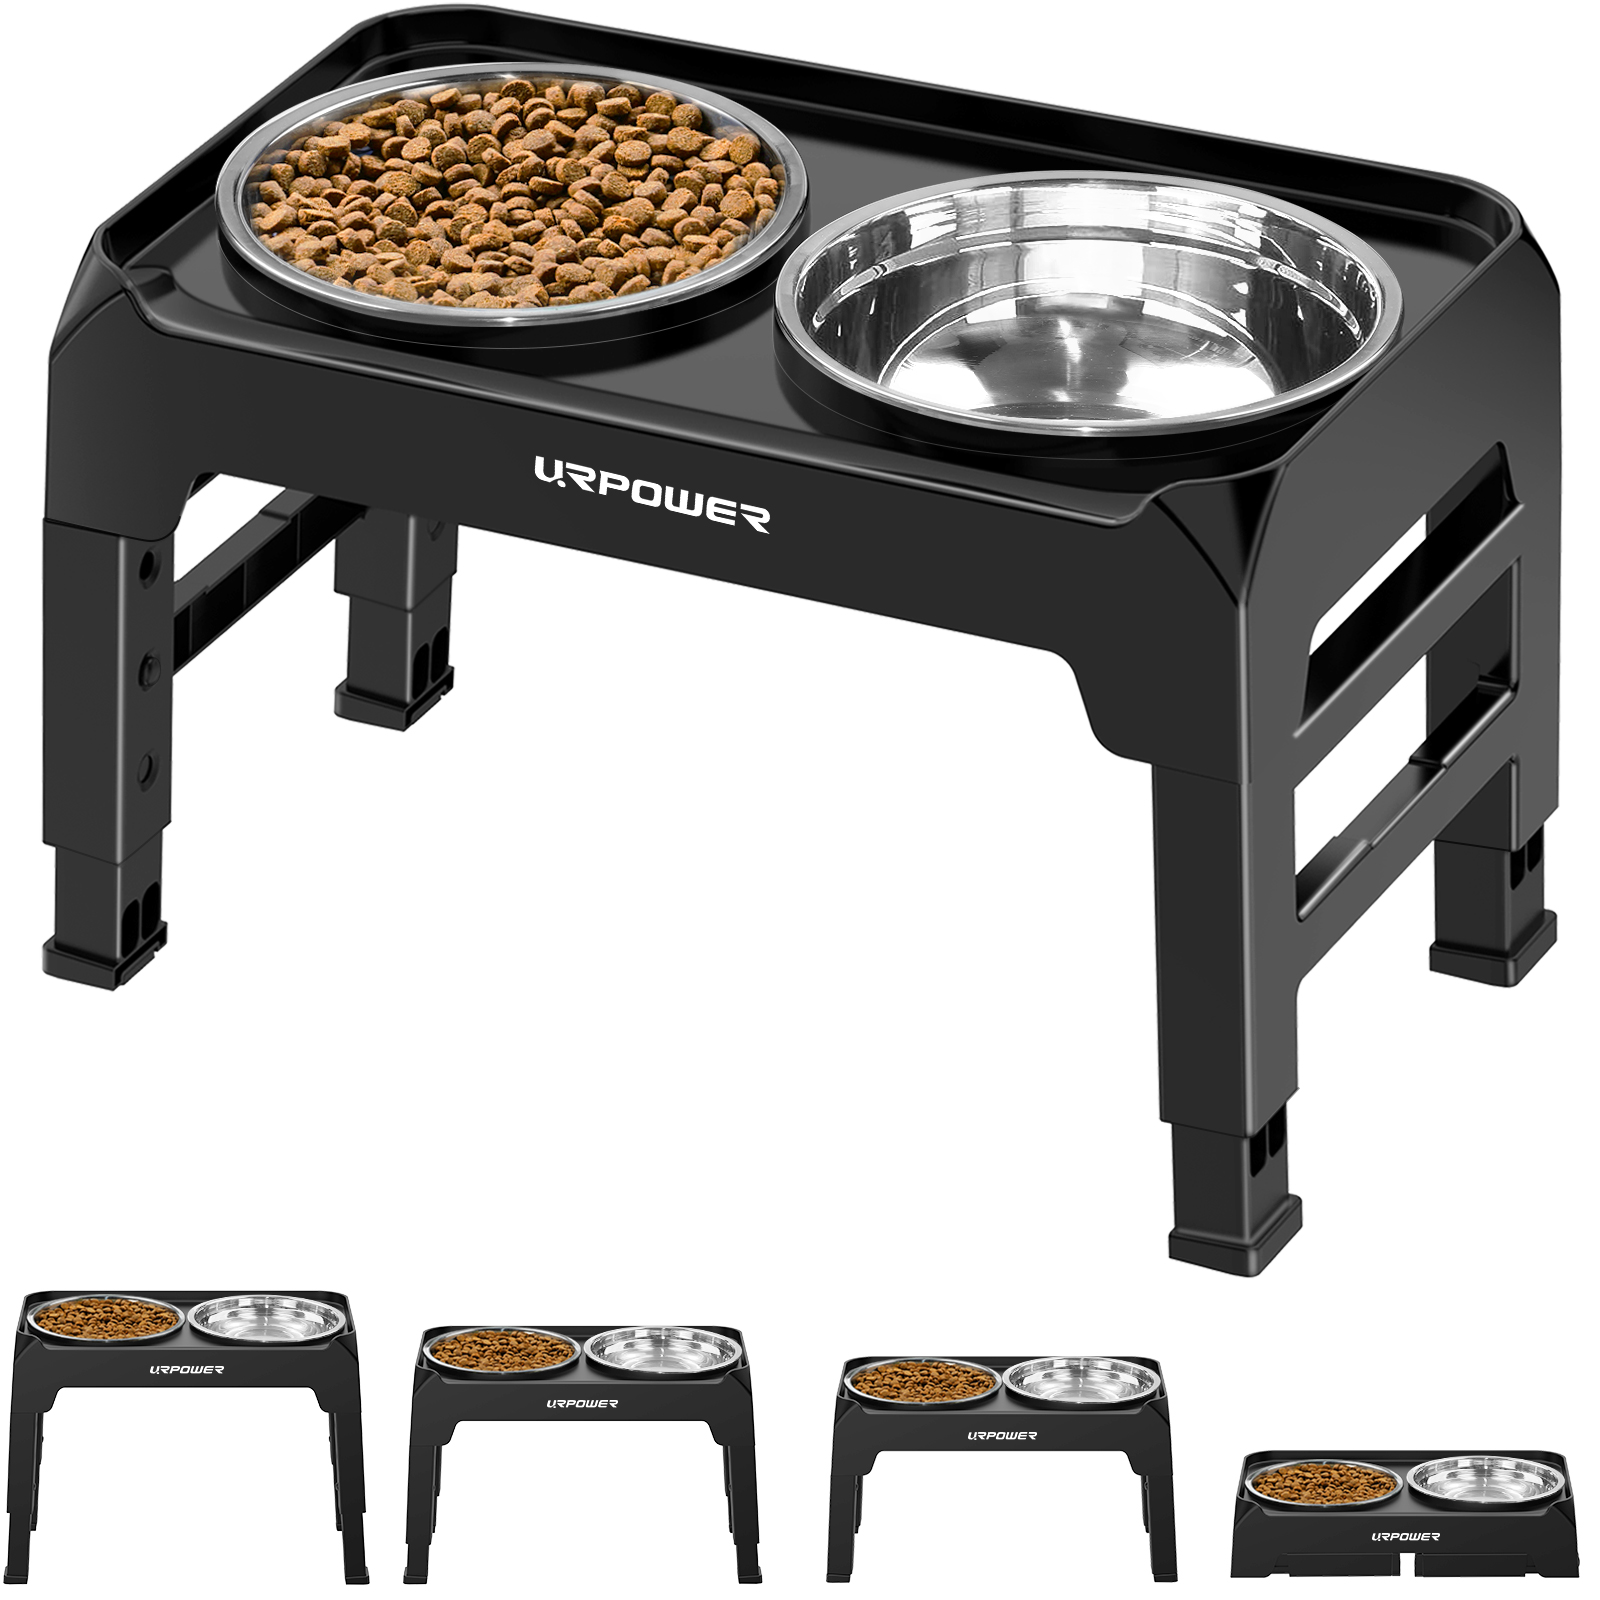 URPOWER Elevated Dog Bowls Adjustable Raised Dog Bowl with 2 Stainless Steel 1.5L Dog Food Bowls Stand Non-Slip No Spill Dog Dish Adjusts to 3 Heights 2.8”, 8”, 12”for Small Medium Large Dogs and Pets